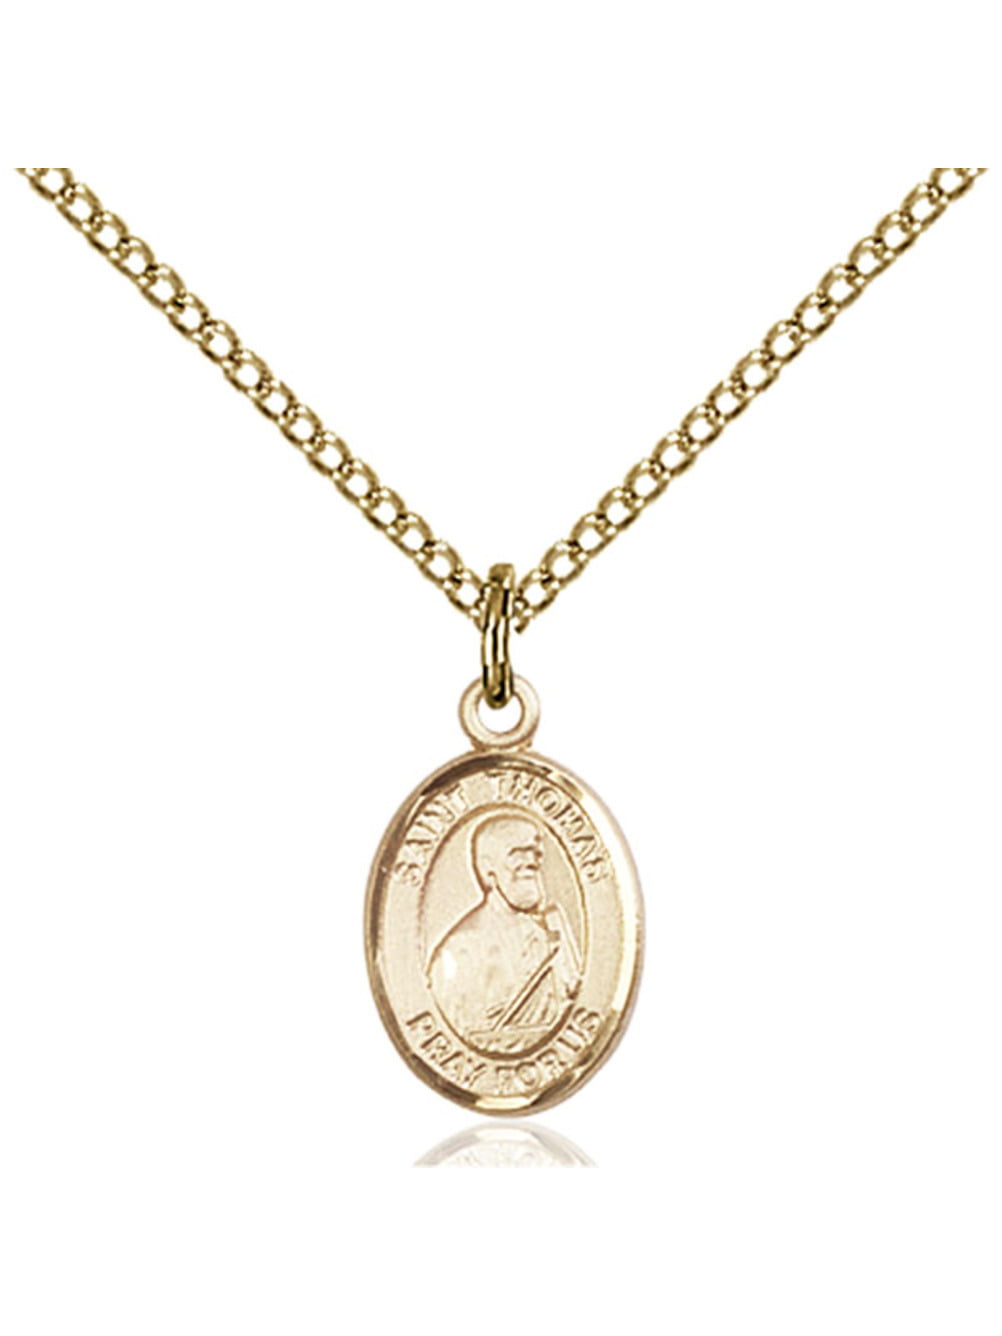 18-Inch Hamilton Gold Plated Necklace with 4mm Light Rose Birthstone Beads and Gold Filled Saint Philip Neri Charm.